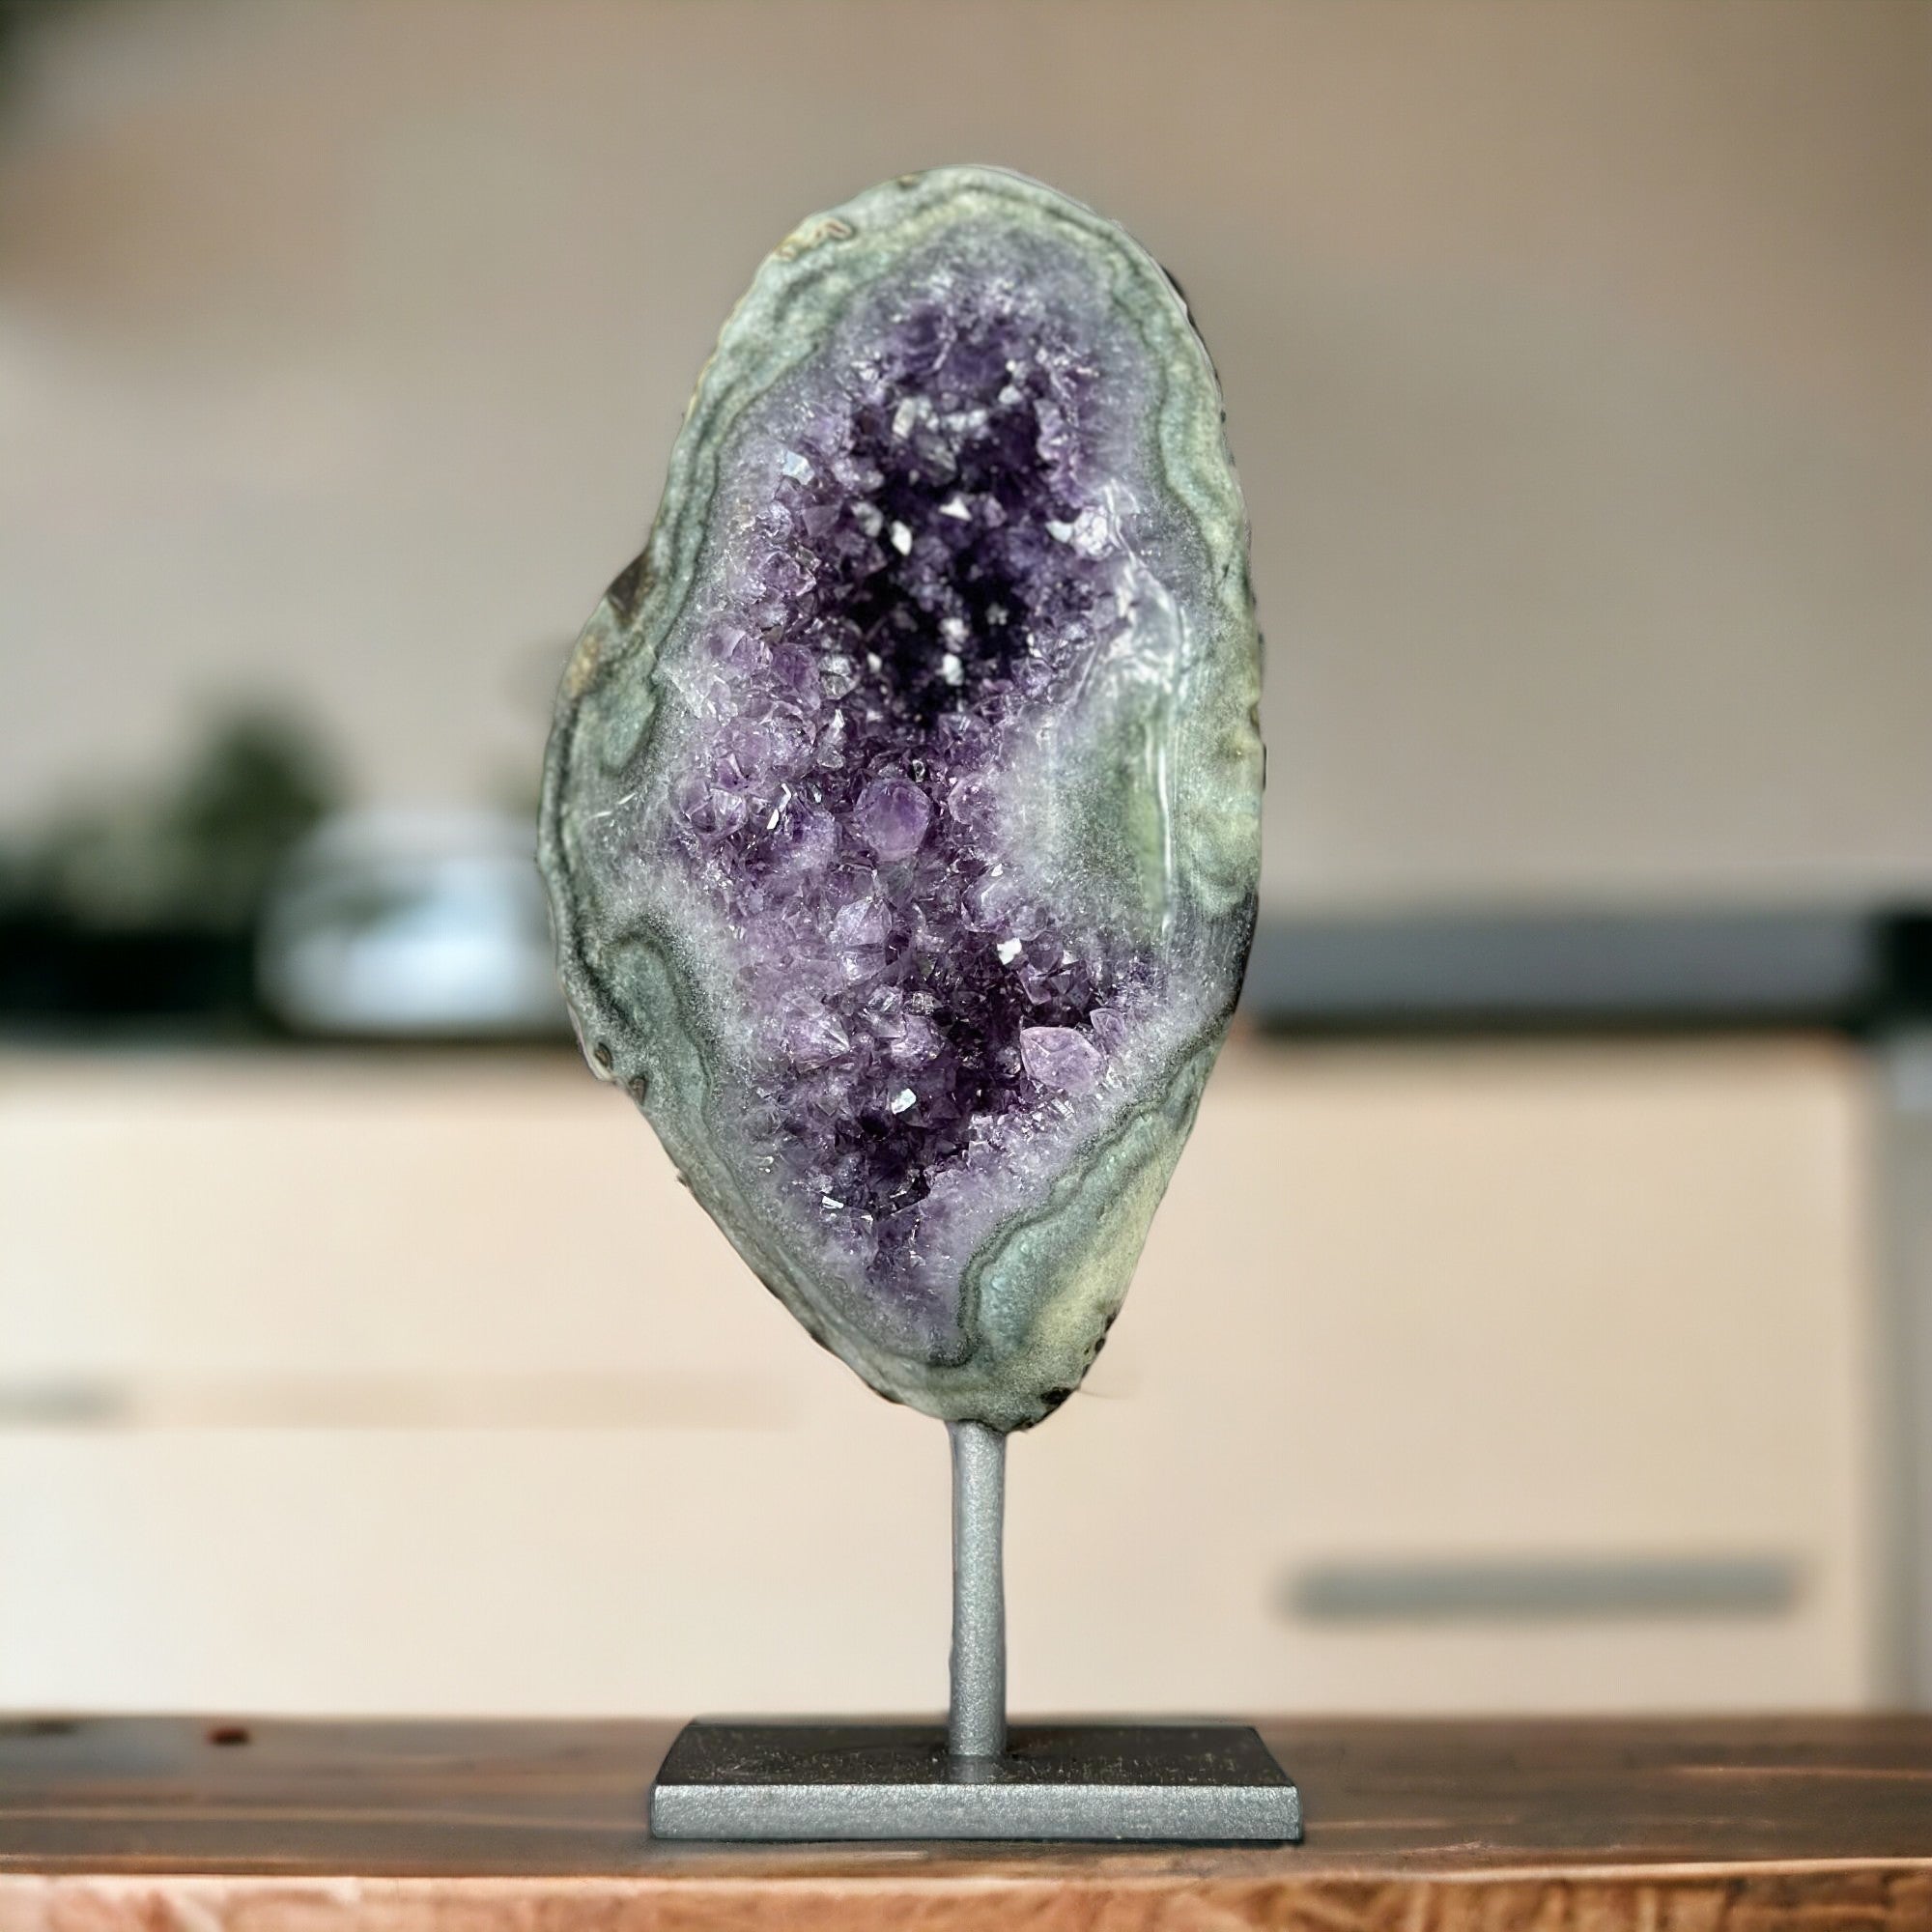 Amethyst with Stalactite Eye formation and Metal Base, Druzy Crystal 100% natural